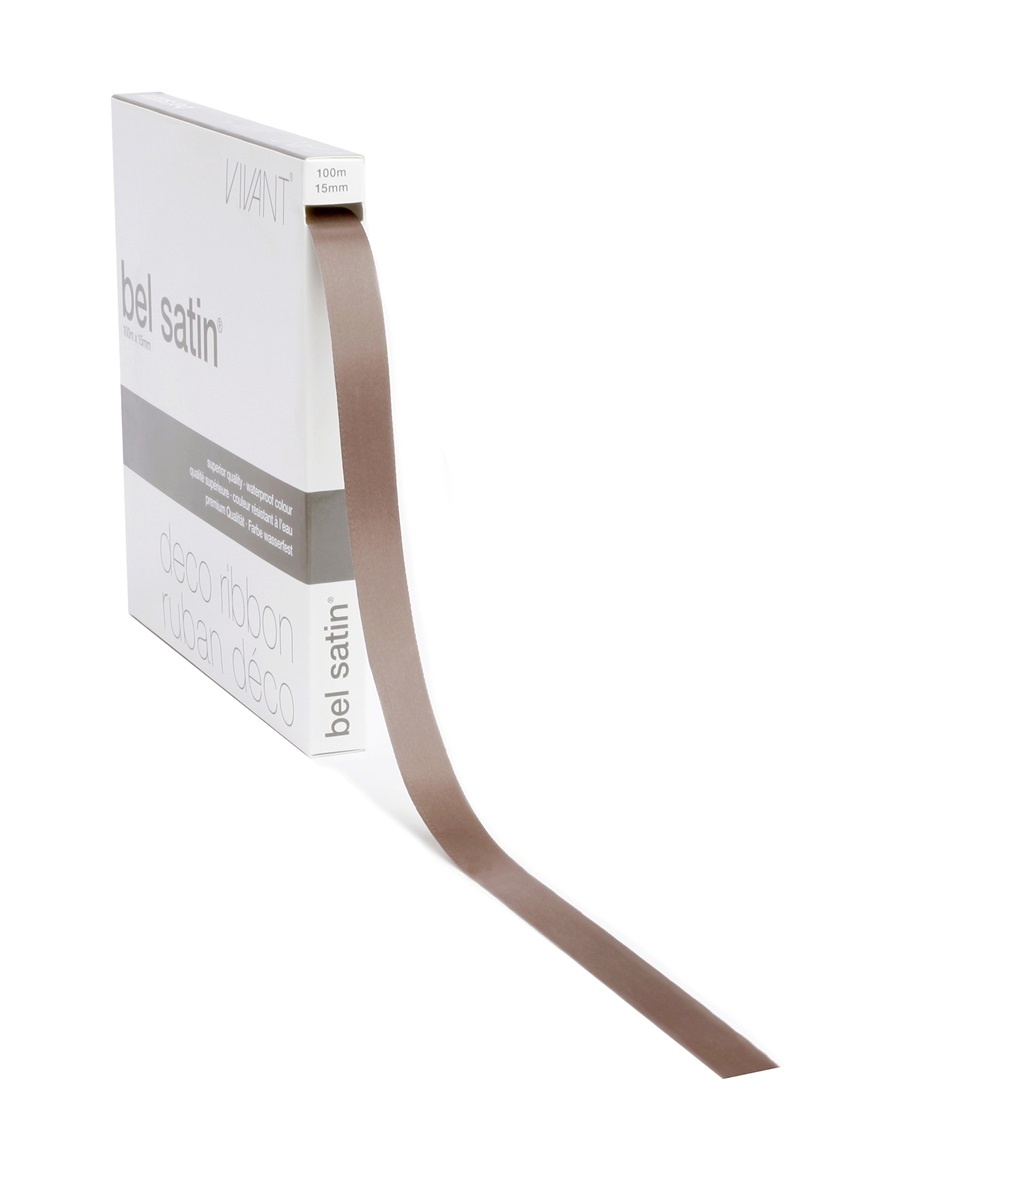 Bel Satin ribbon -  72A nude - 100m x  10 mm and 15mm